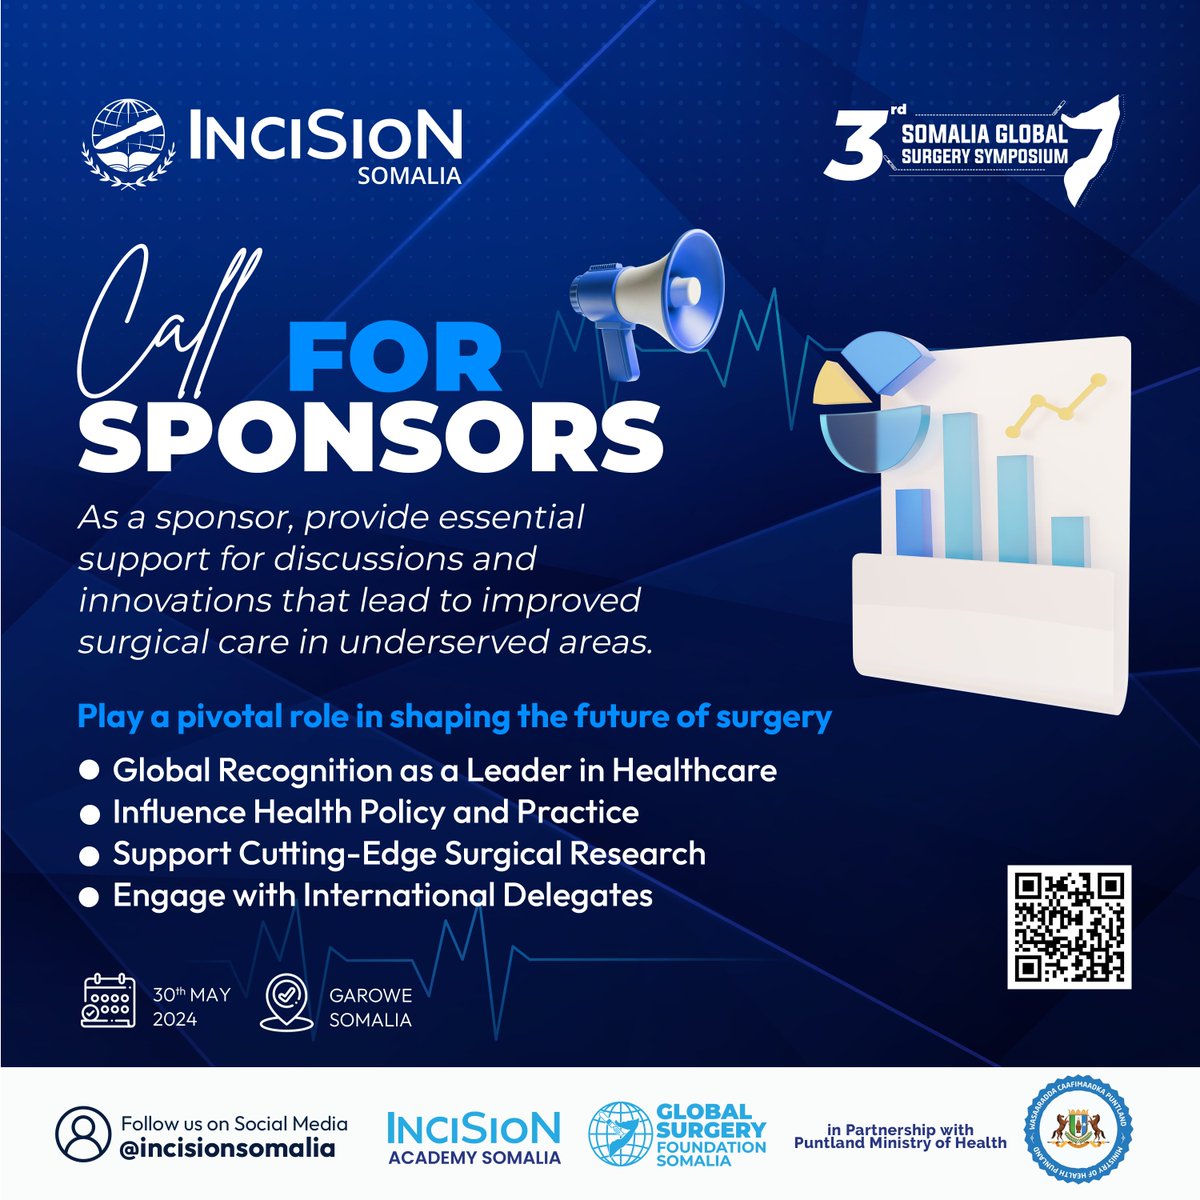 📣 We're seeking pioneers in healthcare to join us as sponsors for the 3rd Somalia Global Surgery Symposium! 🌍 As a sponsor, you'll support vital discussions and innovations that are key to enhancing surgical care in underserved regions.